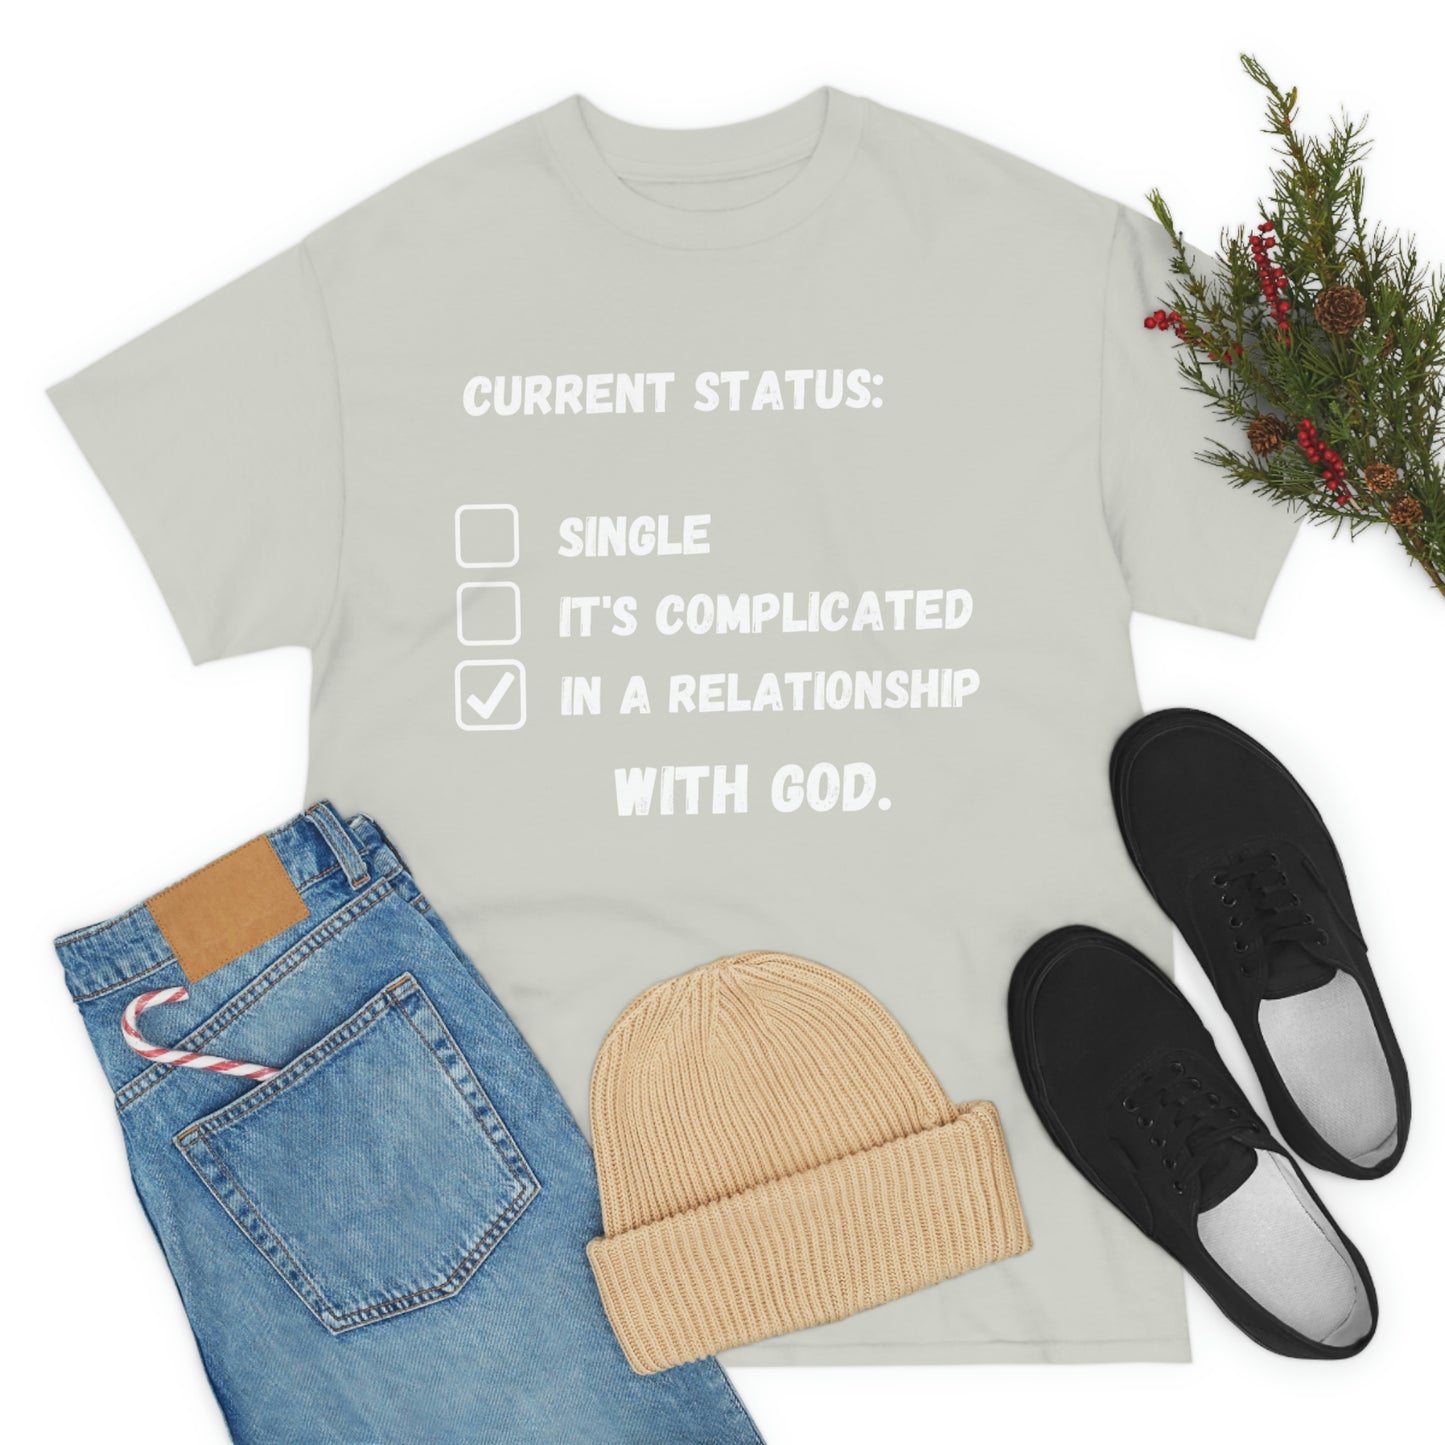 In A relationship with GOD. T-Shirt